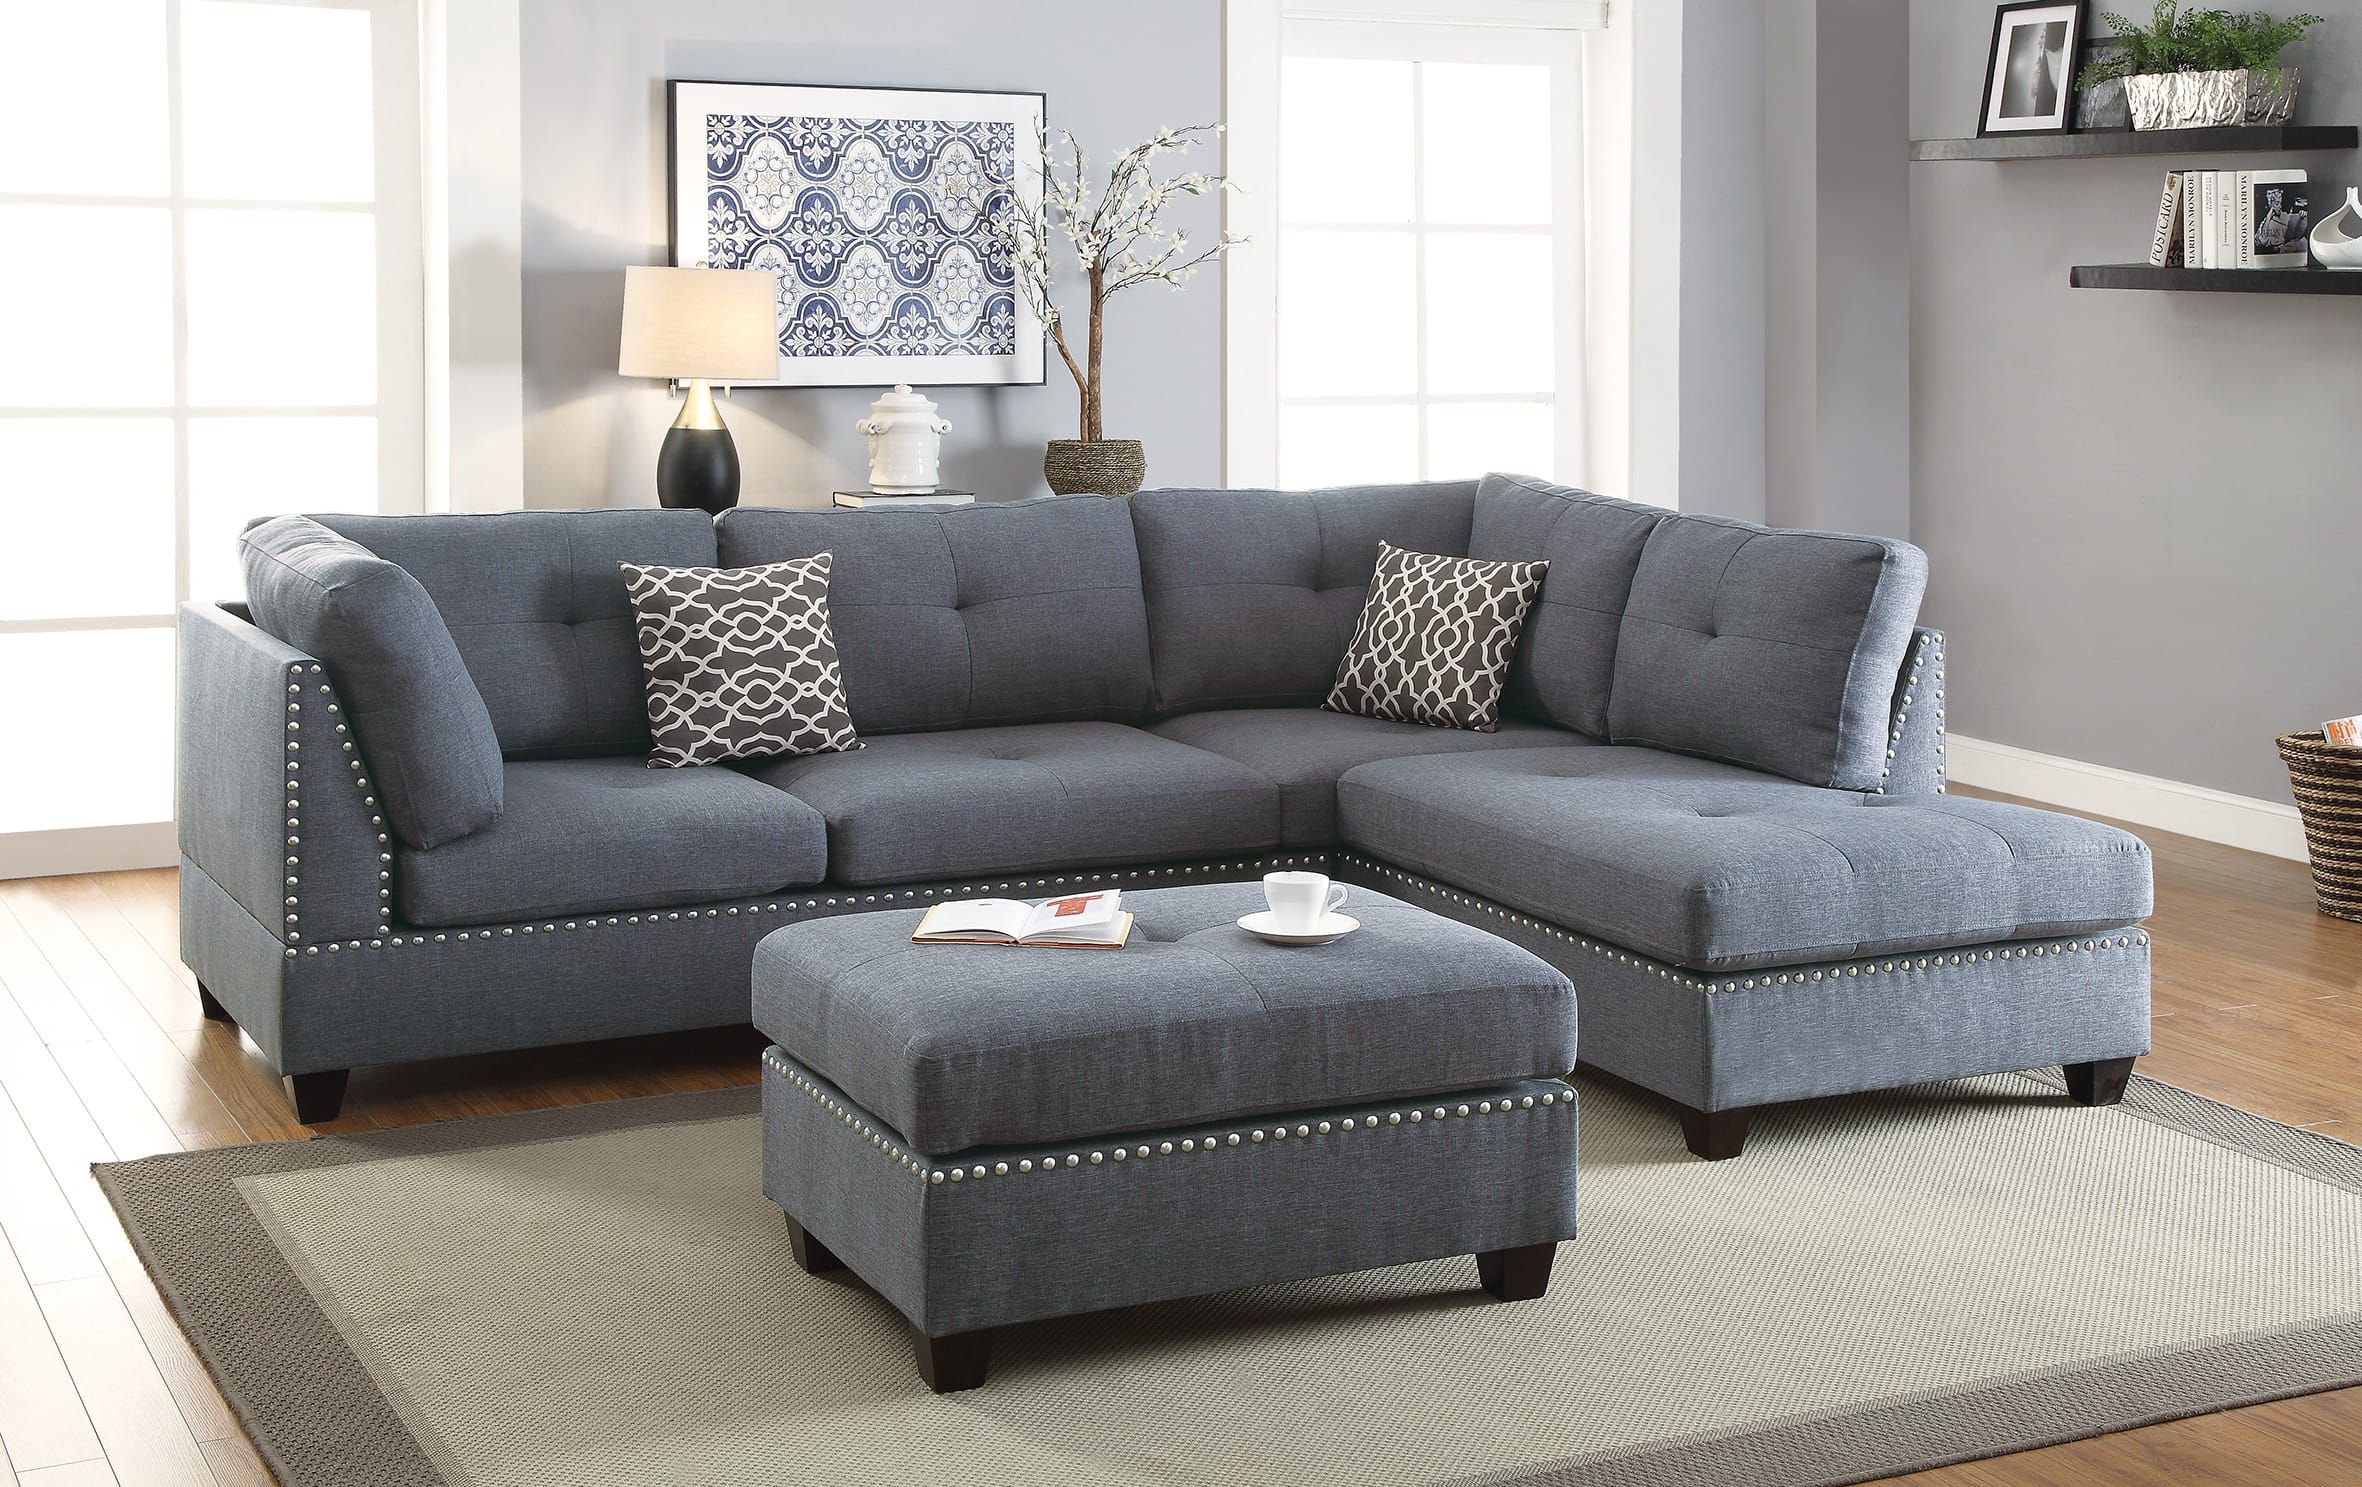 F6975 Blue Gray 3 Pcs Sectional Sofa Setpoundex Intended For Sofas In Bluish Grey (View 2 of 20)